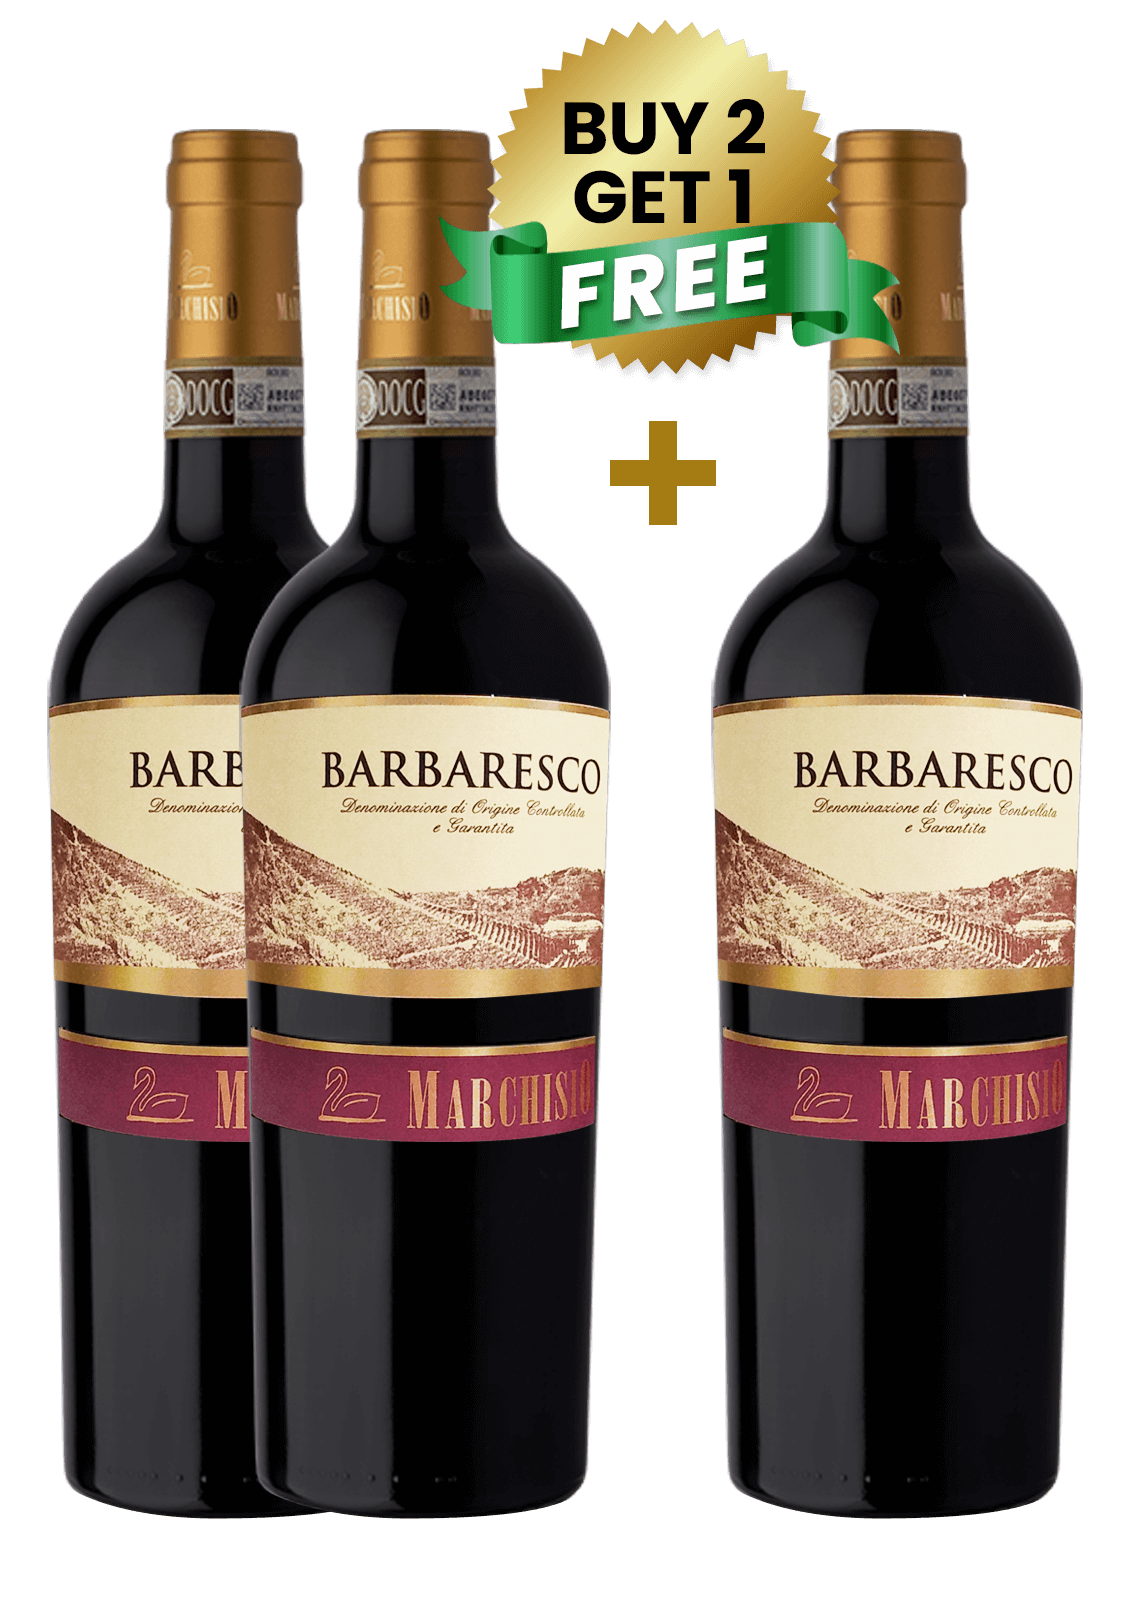 Marchisio Barbaresco Docg 75Cl (Buy 2 Get 1 Free)